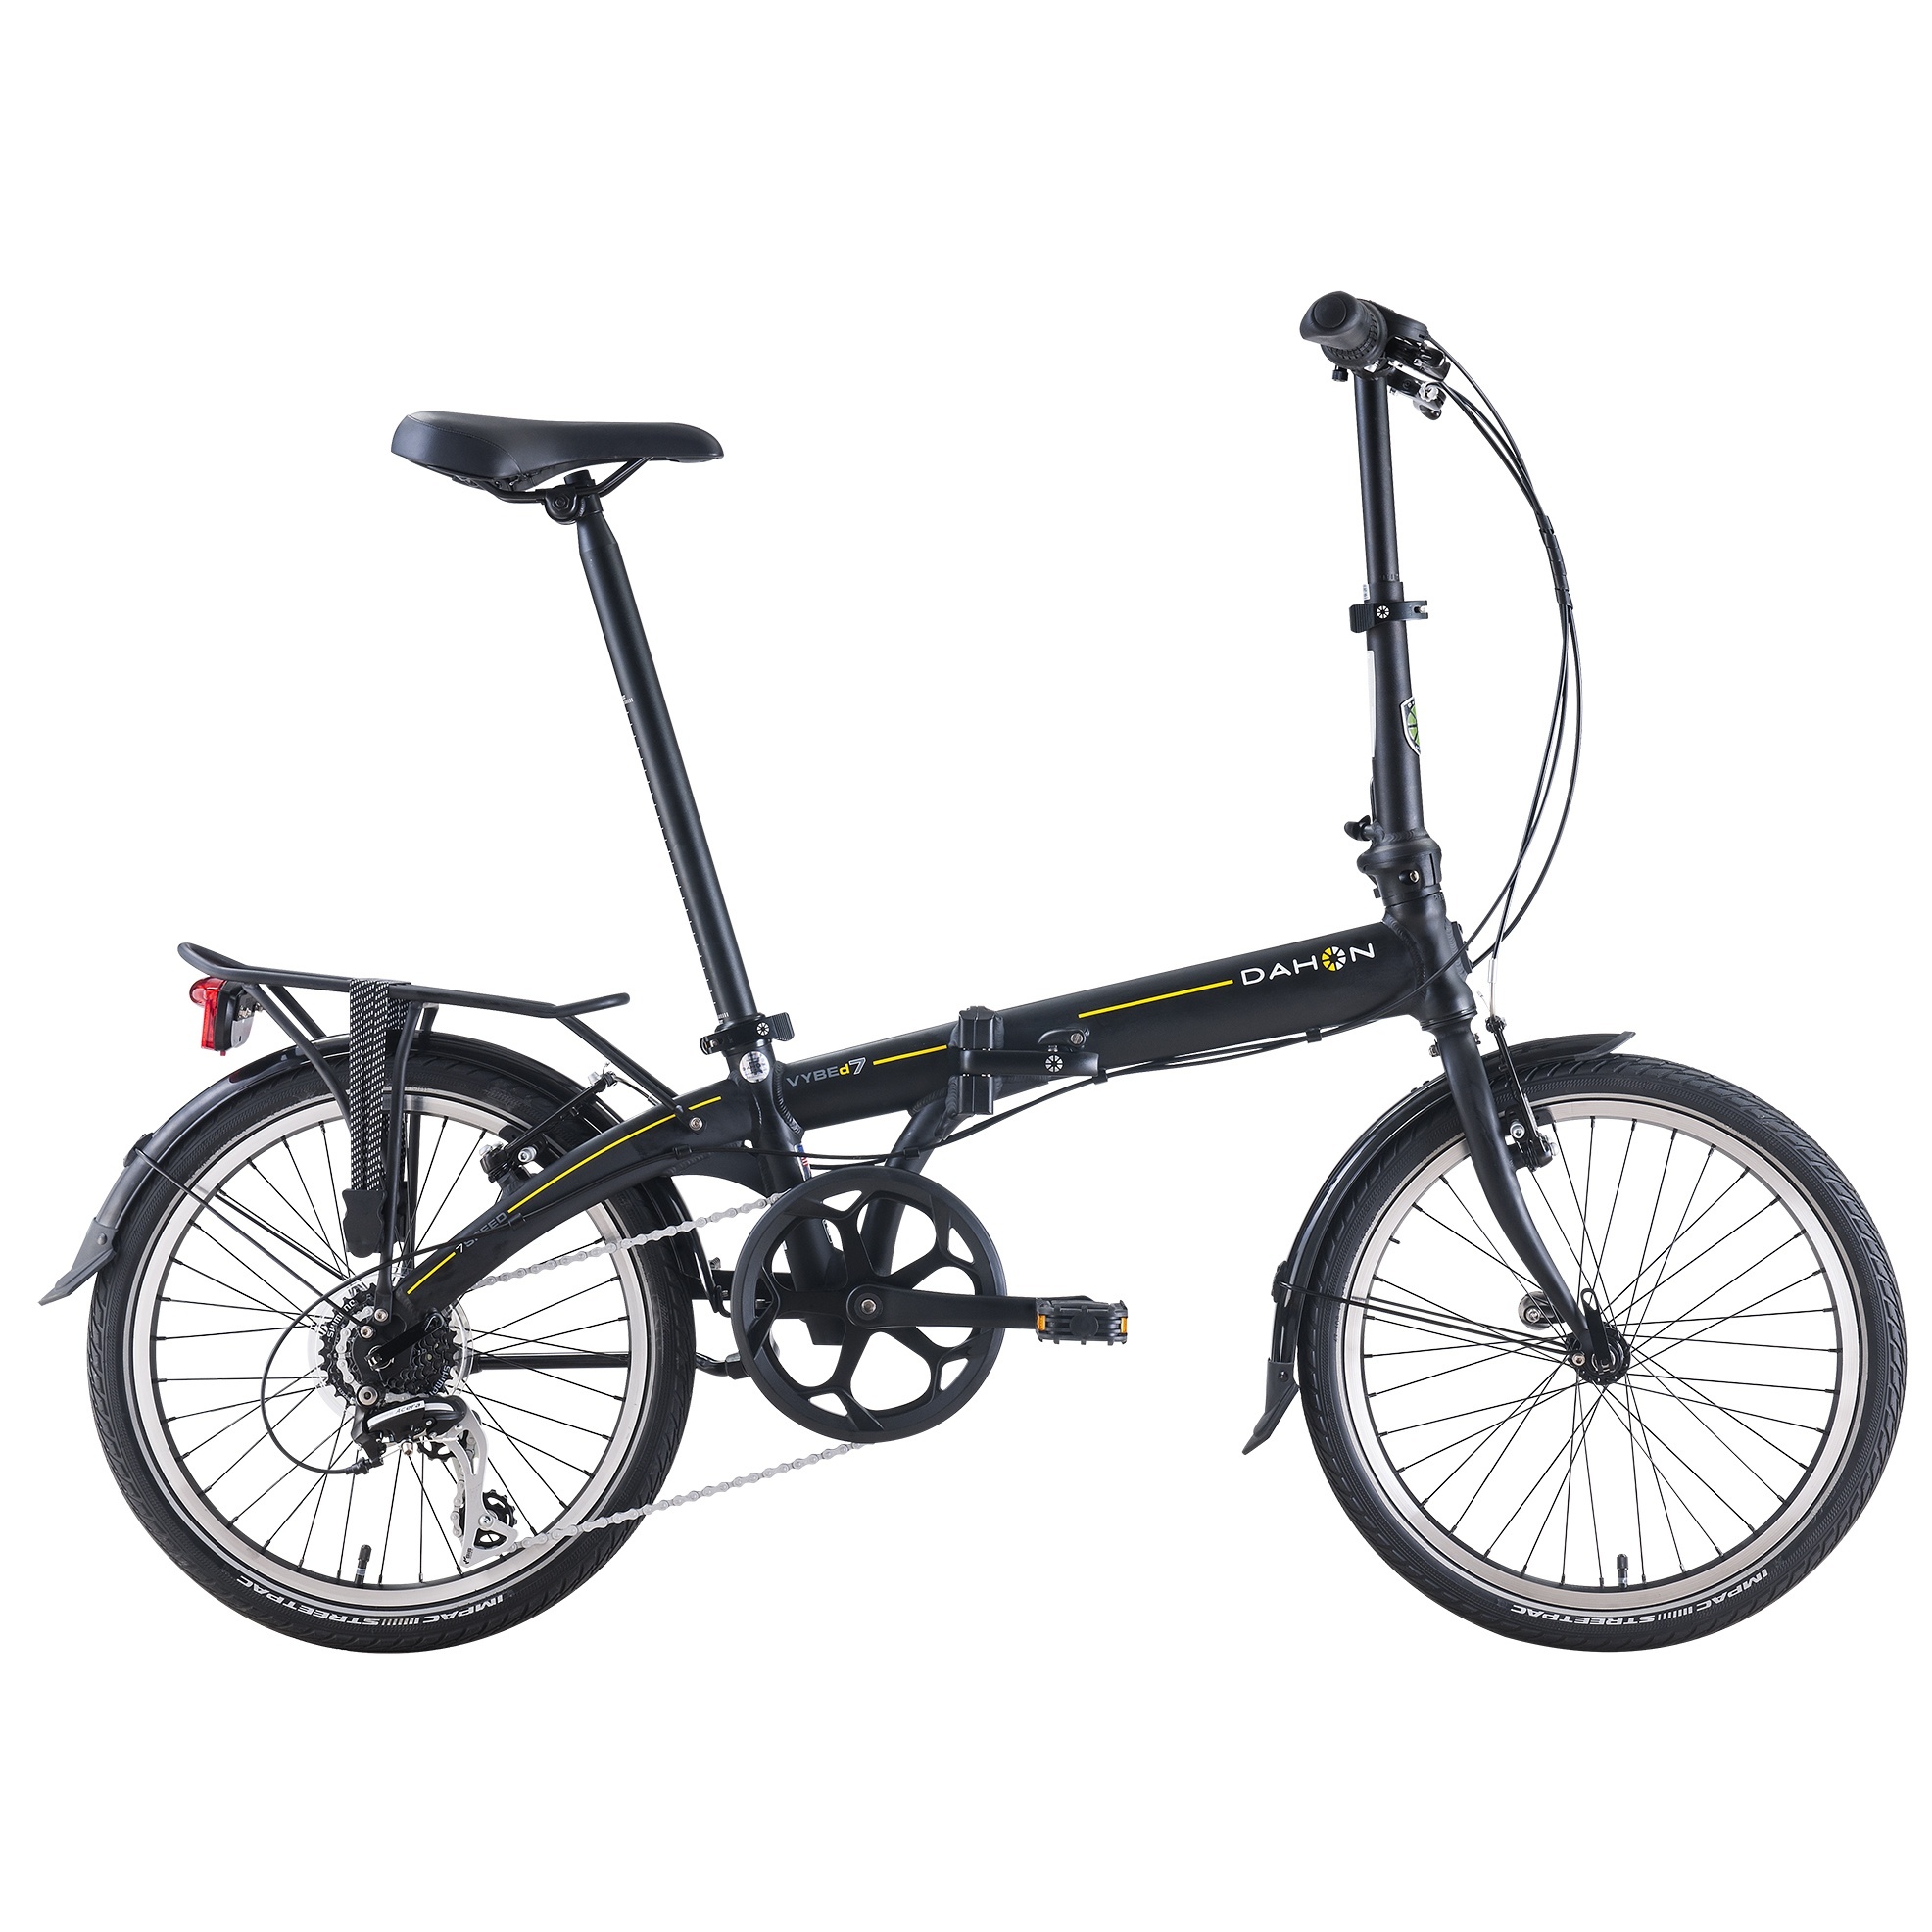 DAHON folding tricycle, Remarkable design, Foldable convenience, Inspiring ride, 1980x1980 HD Handy